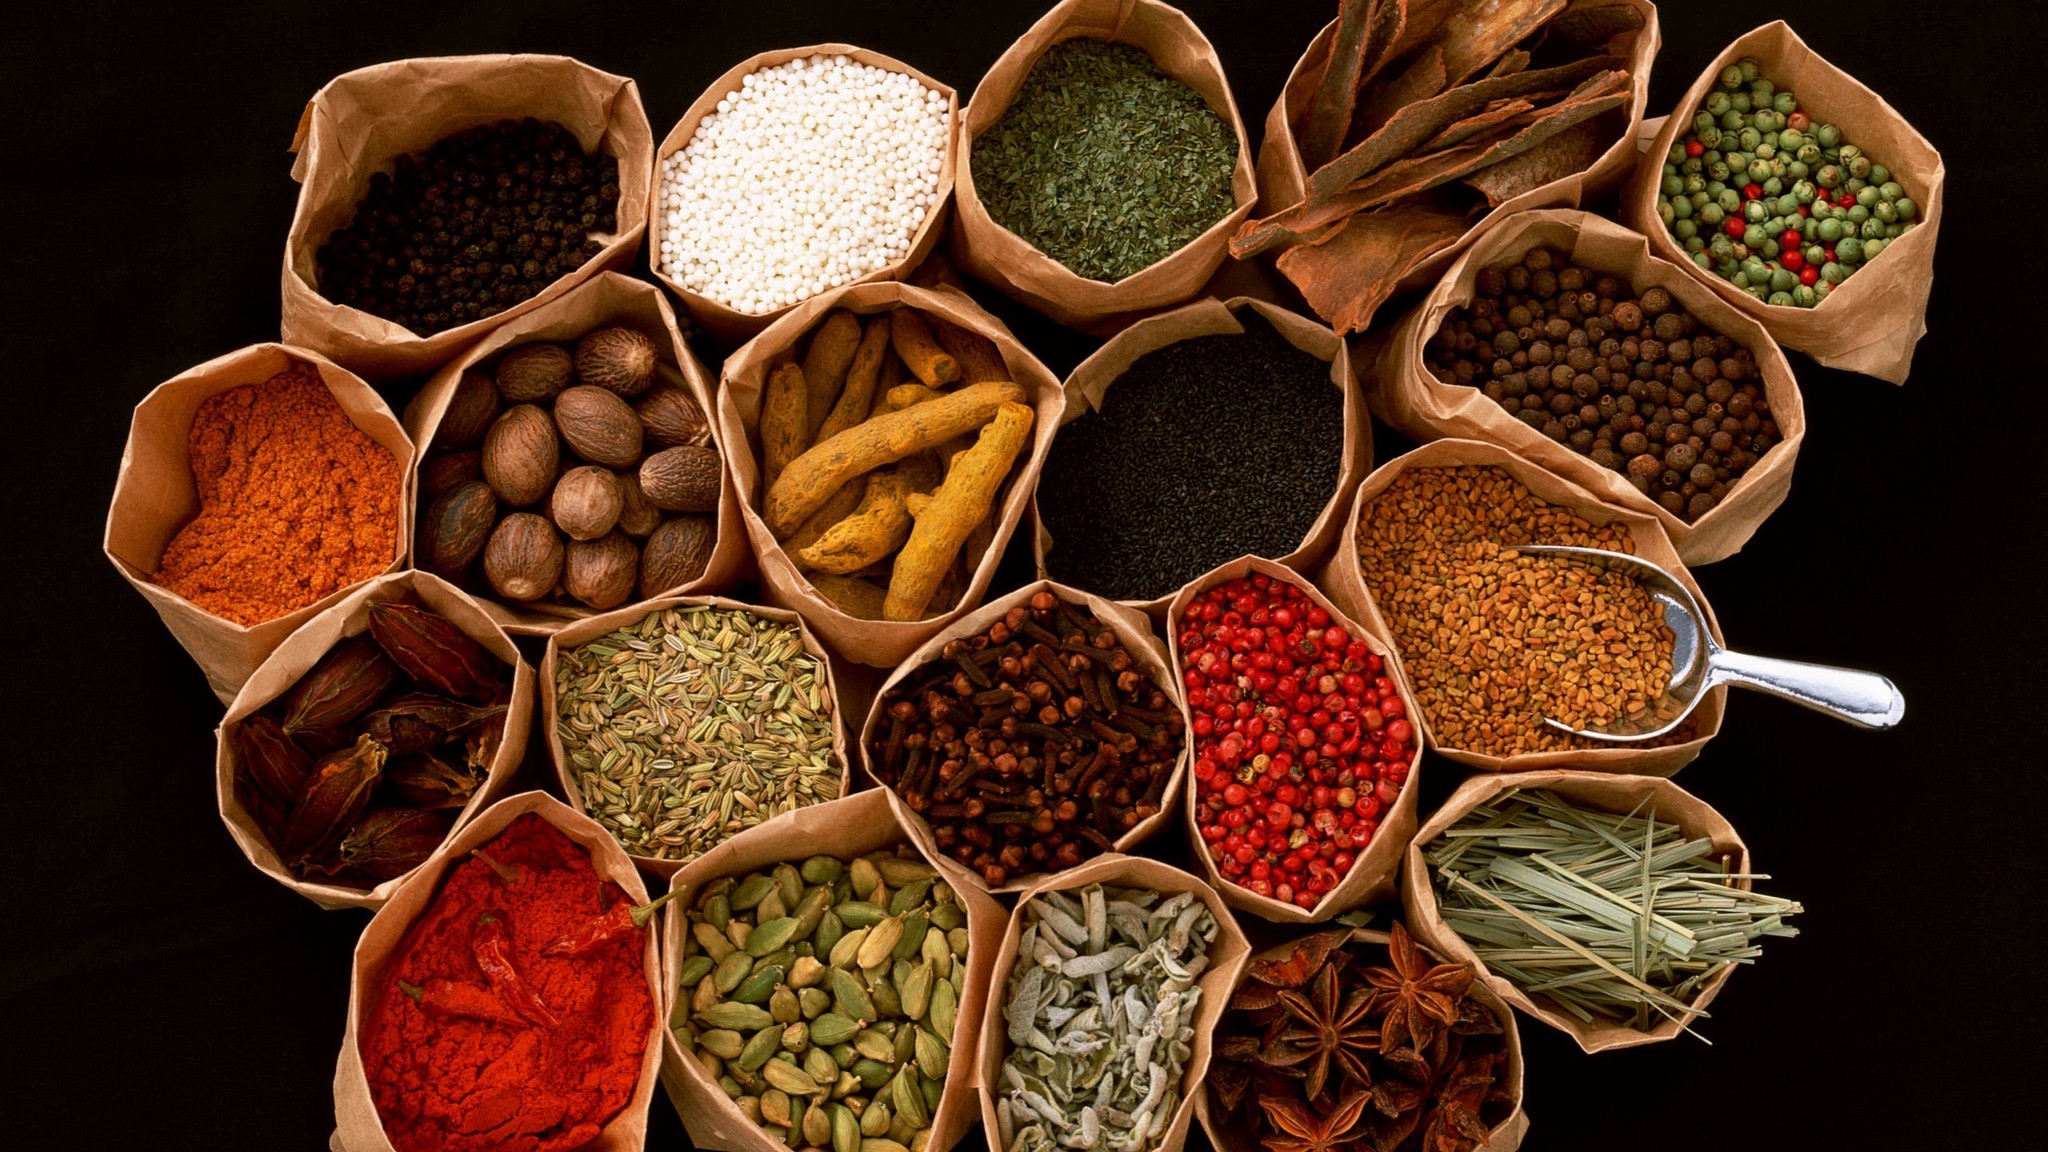 Organic Spices Market Will Grow by 4.6% Amid Surging Demand for Natural Ingredients in Processed Food Products: FMI 